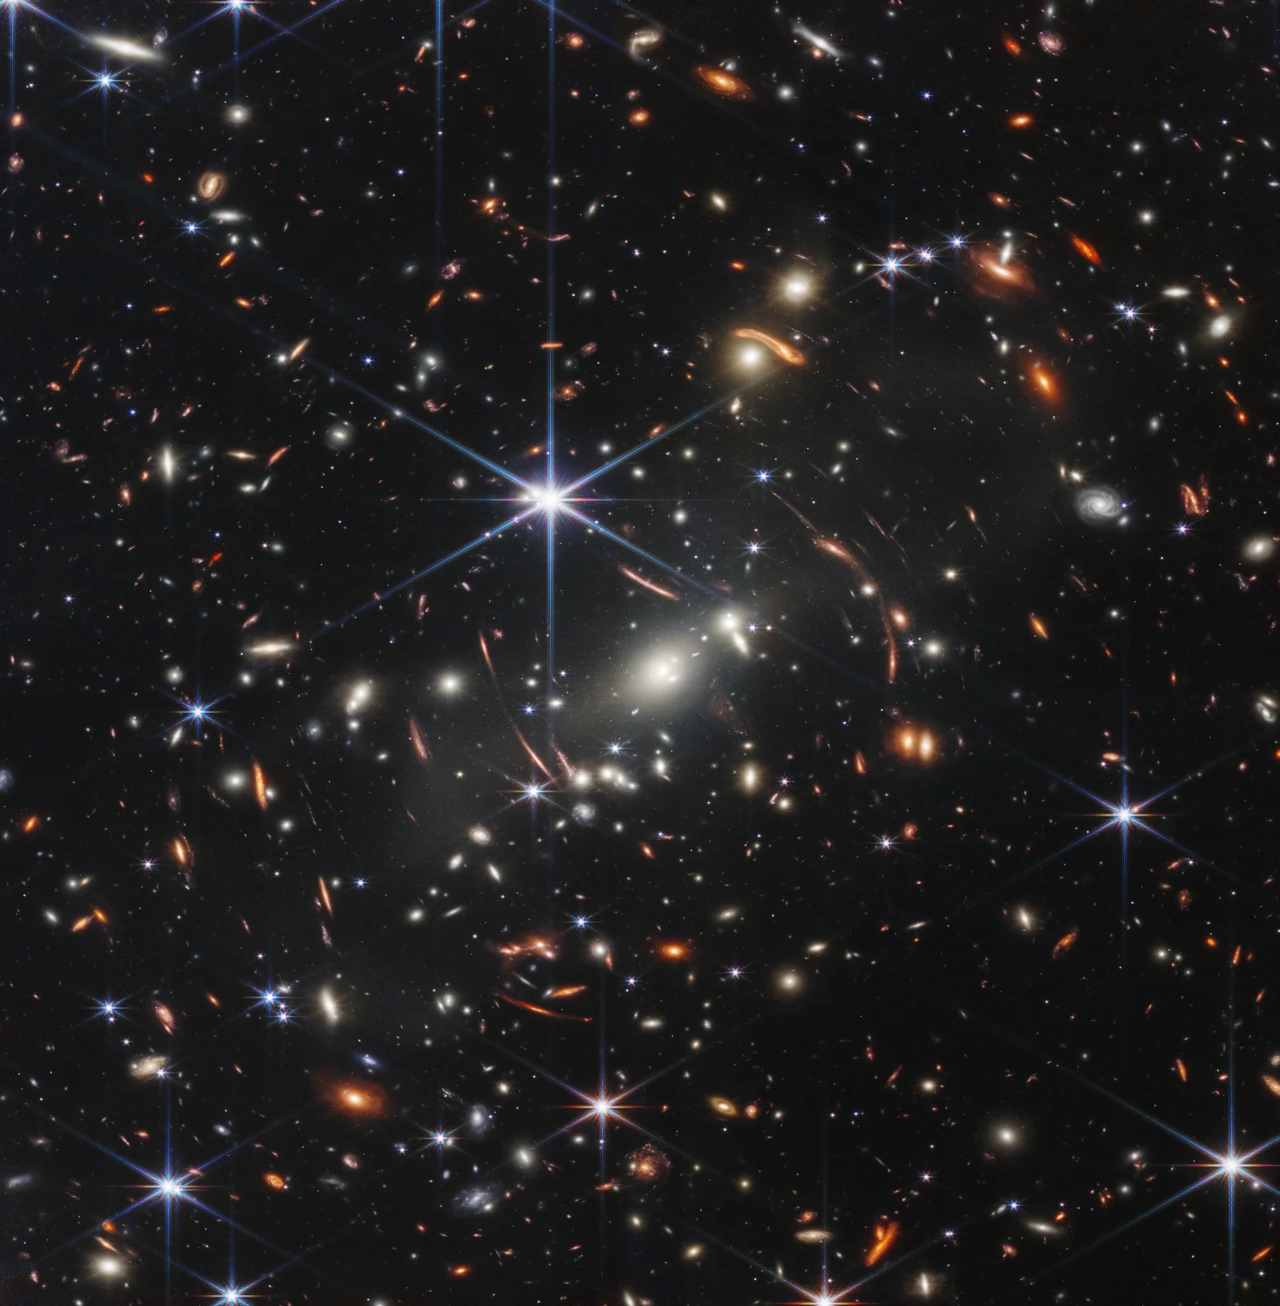 Image of galaxy cluster SMACS 0723, known as Webb’s First Deep Field